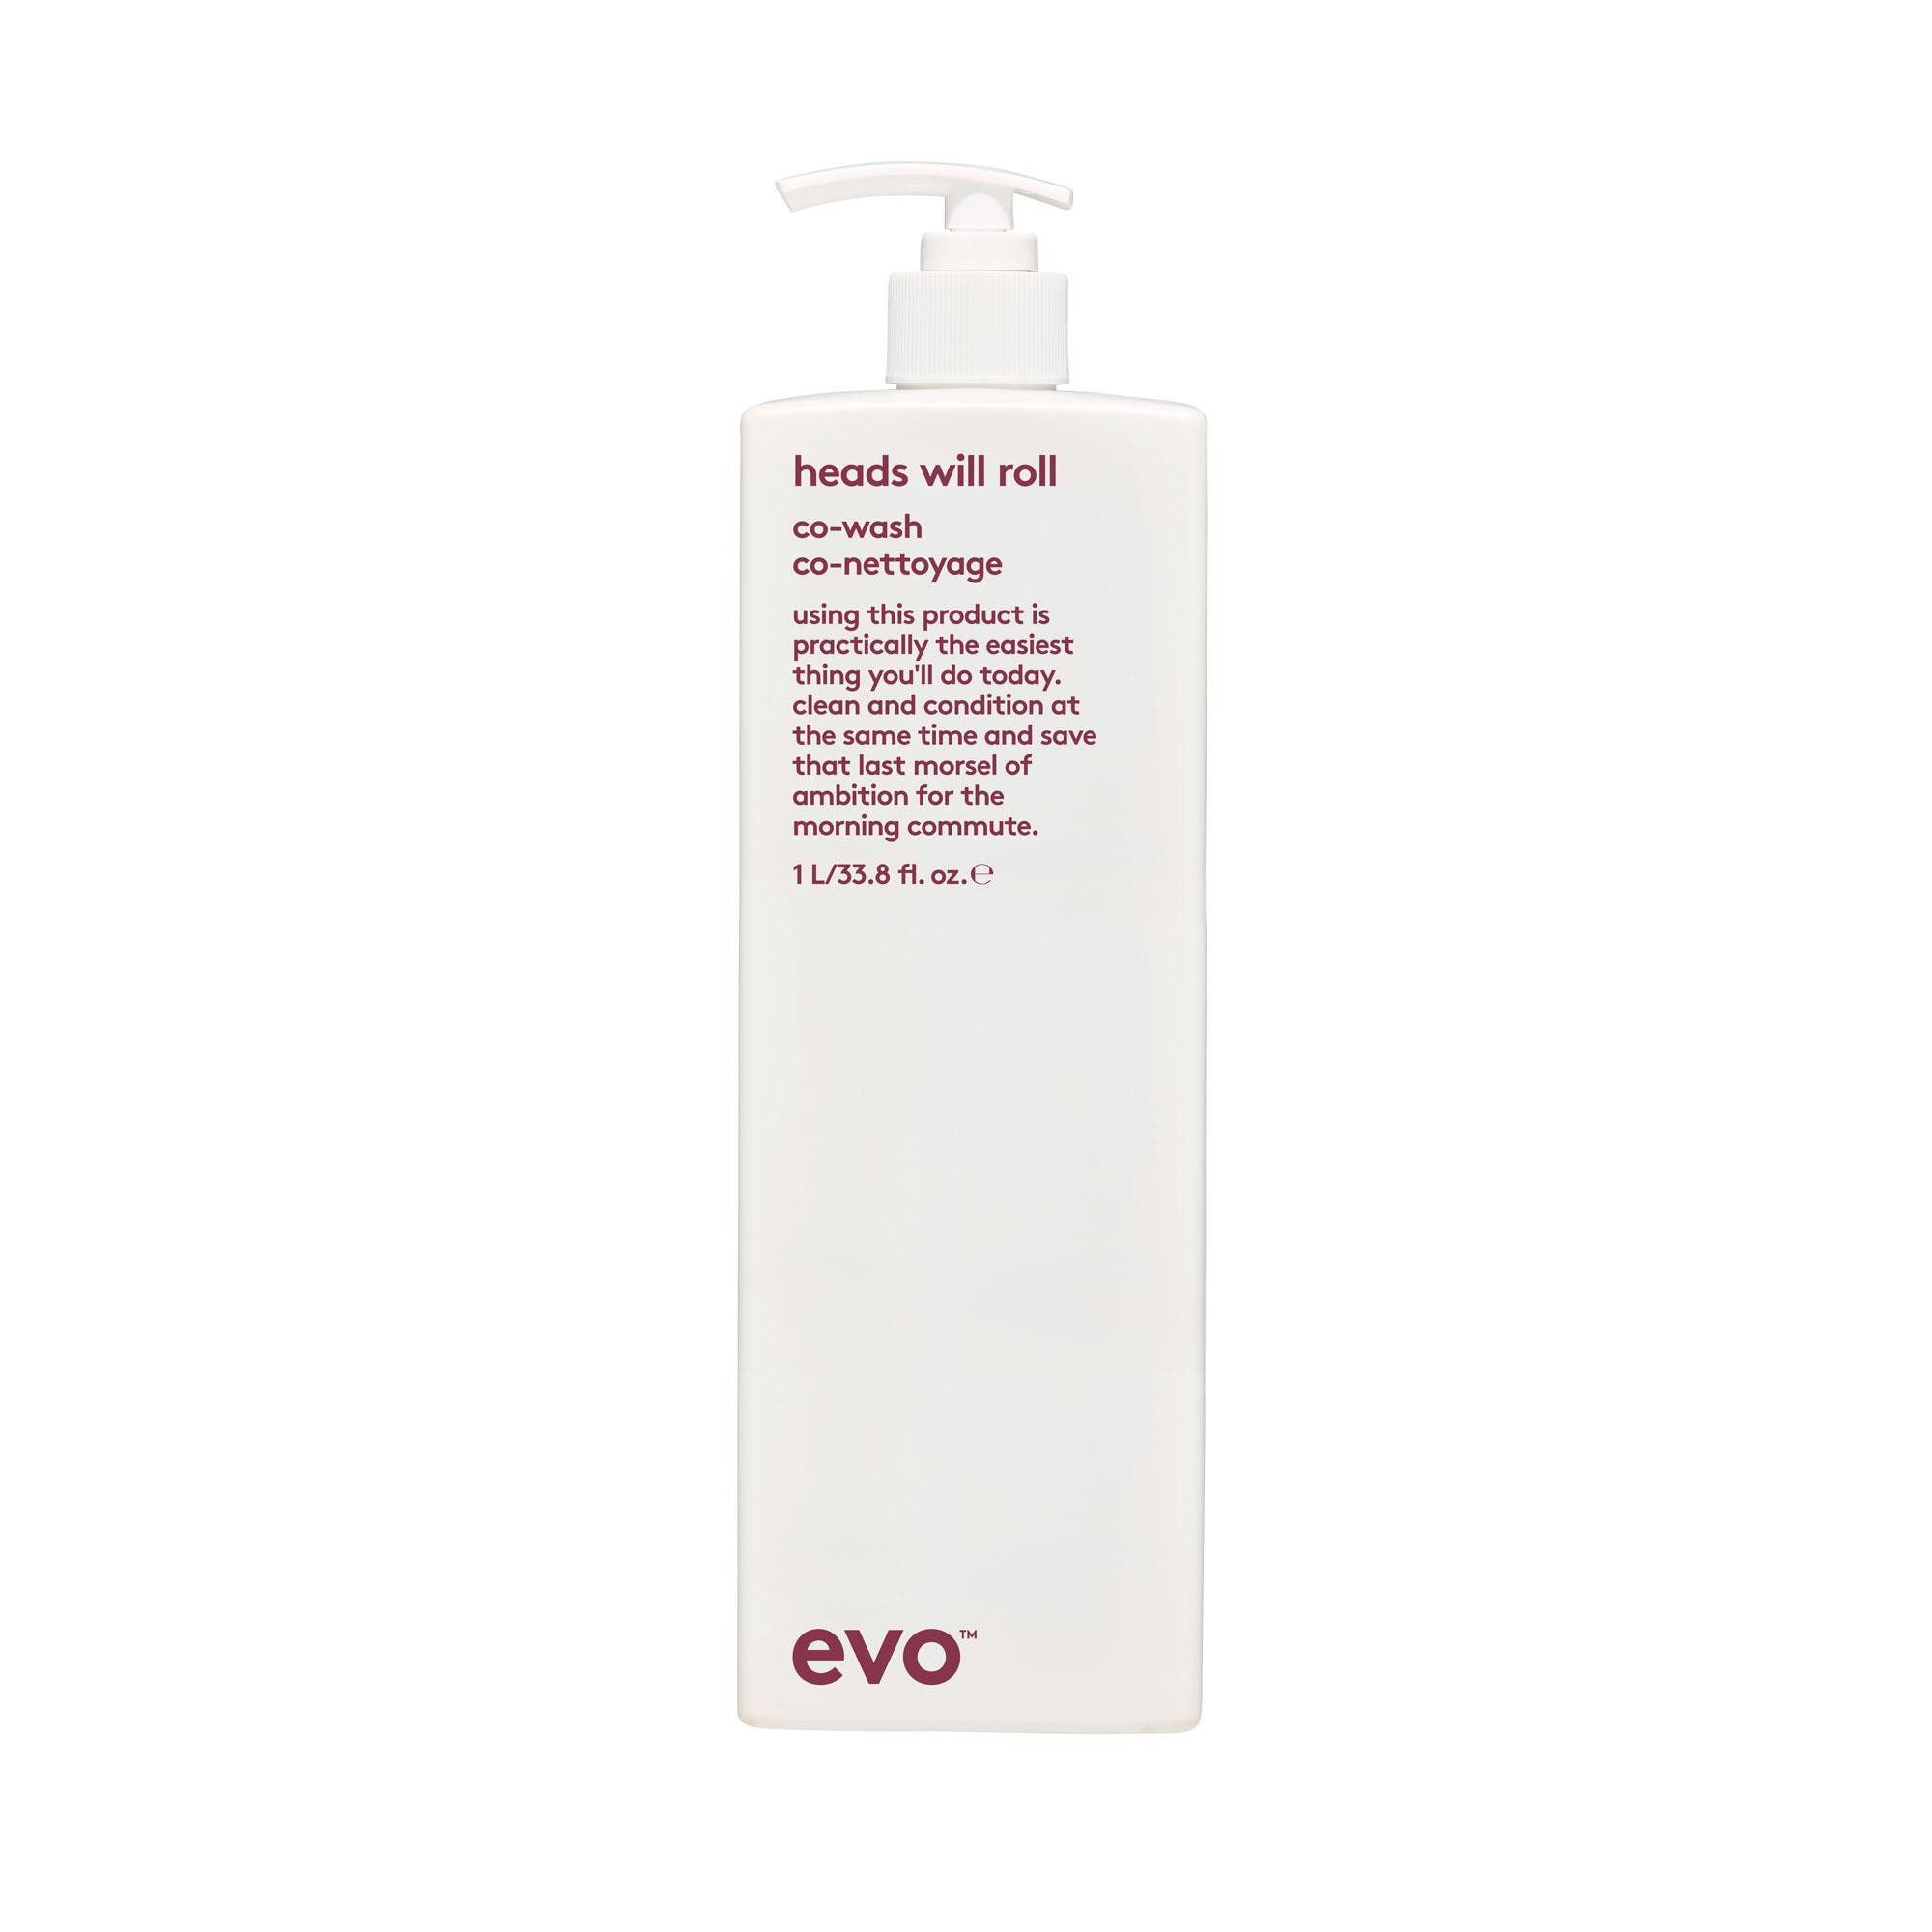 evo heads will roll cleansing conditioner 33.8oz